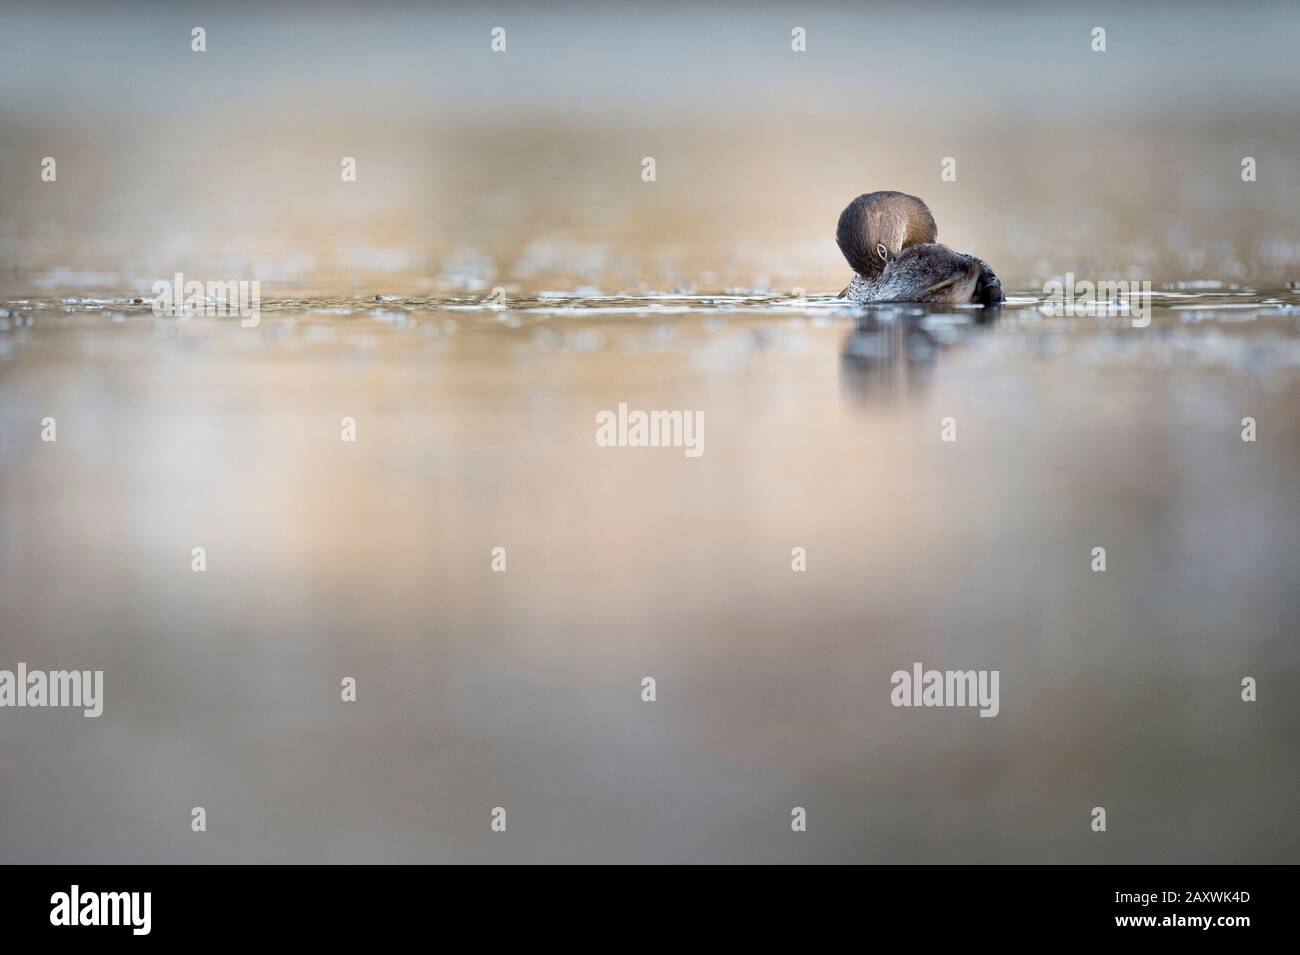 A small Pied-billed Grebe floats on the calm water in the soft sunlight. Stock Photo